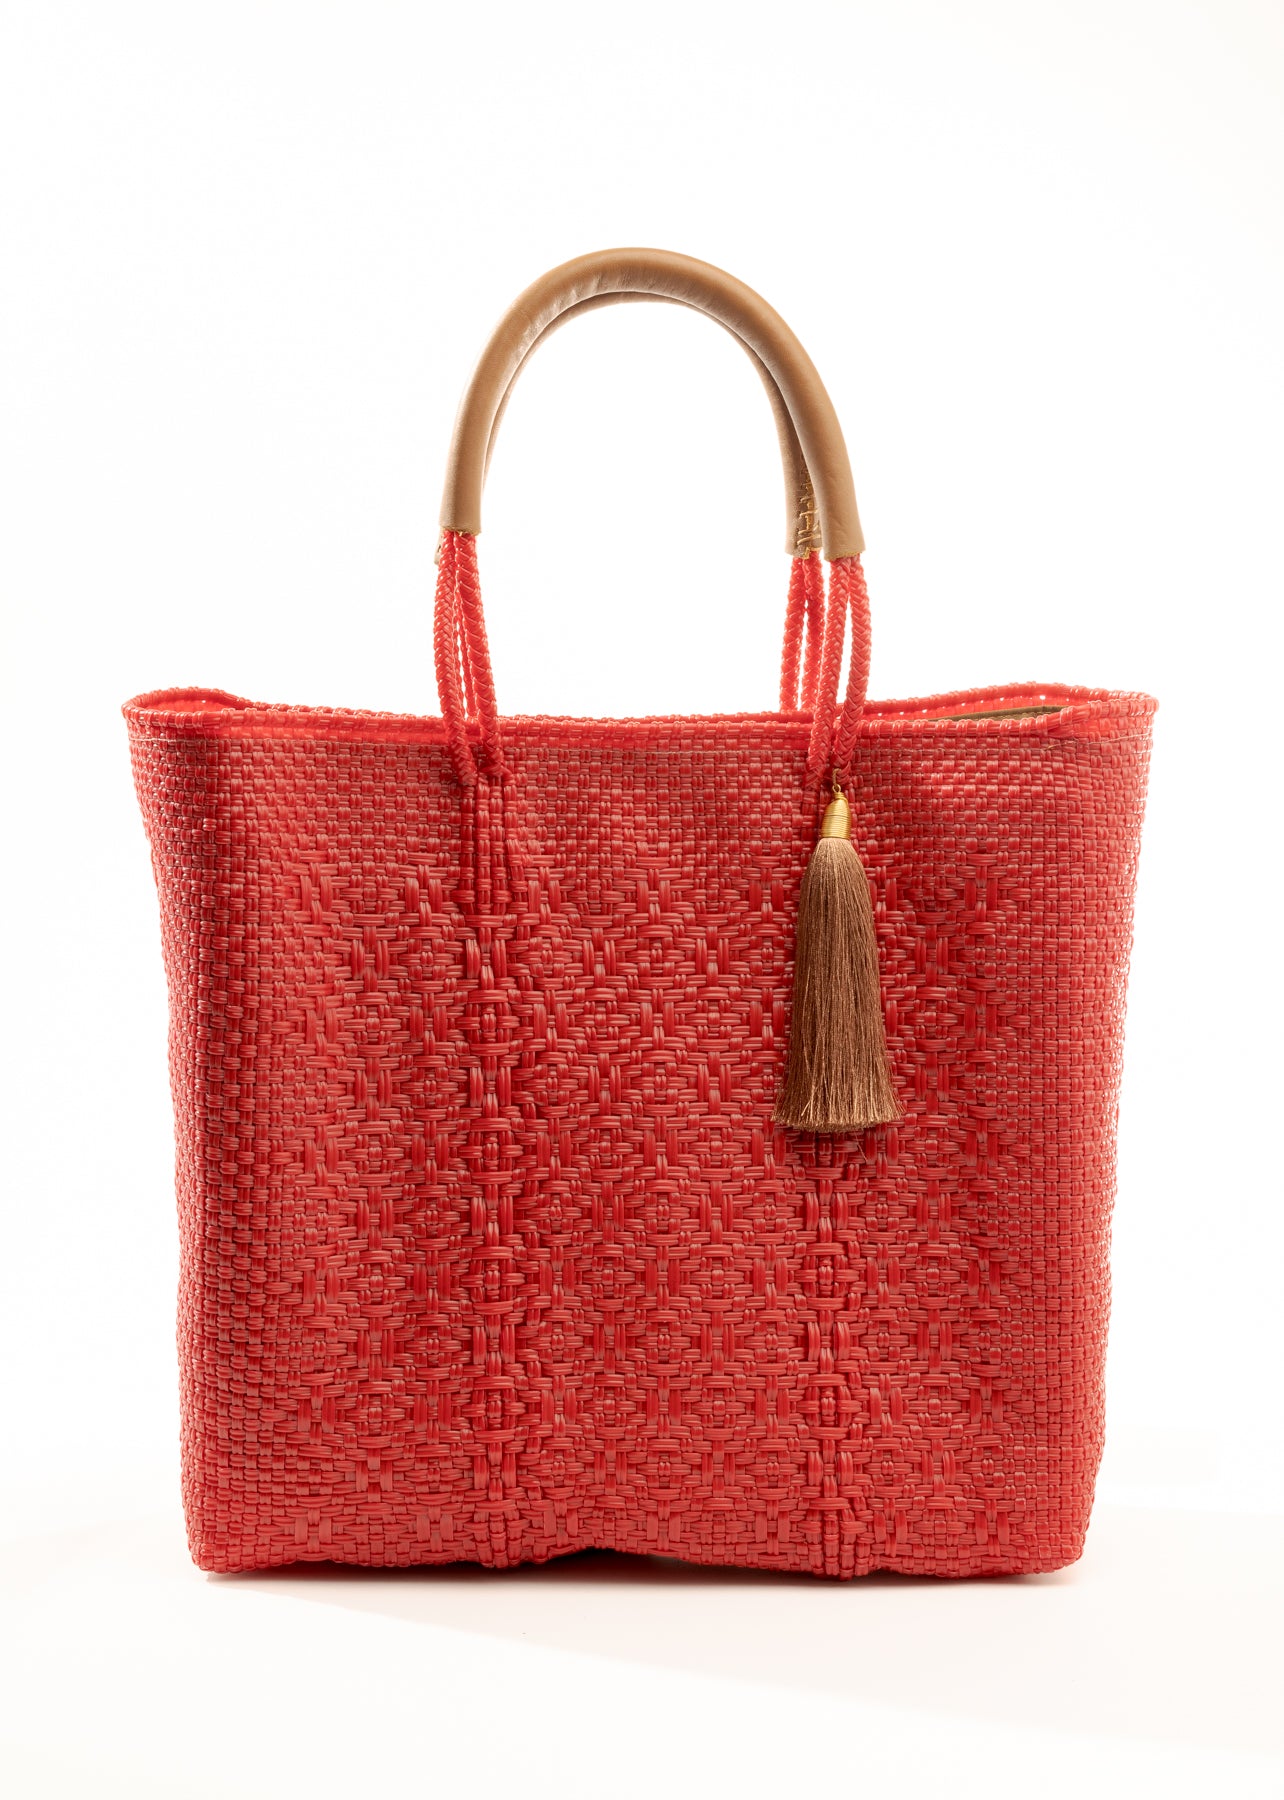 Red woven bucket bag made from recycled plastics with tan leather handle and tassel